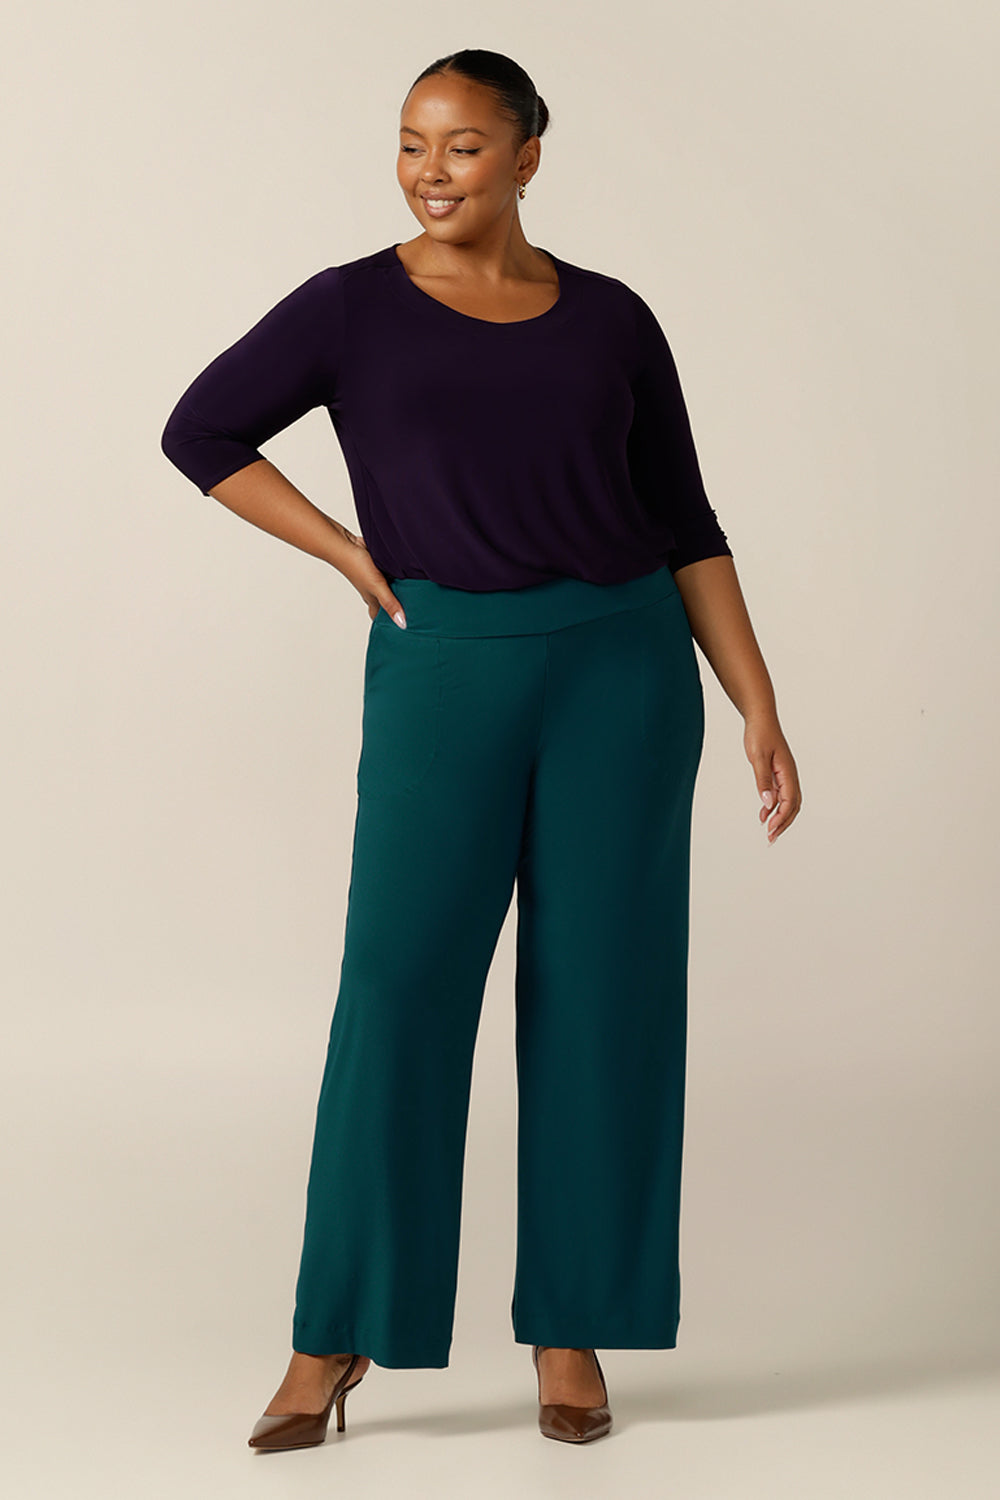 A plus size 18 woman wears Petrol green, straight cut, wide leg, full-length, pull on pants by Australian and New Zealand women's clothing brand, L&F. Featuring a pull-on waistband, these stretch jersey trousers are good pants for comfortable corporate wear. 